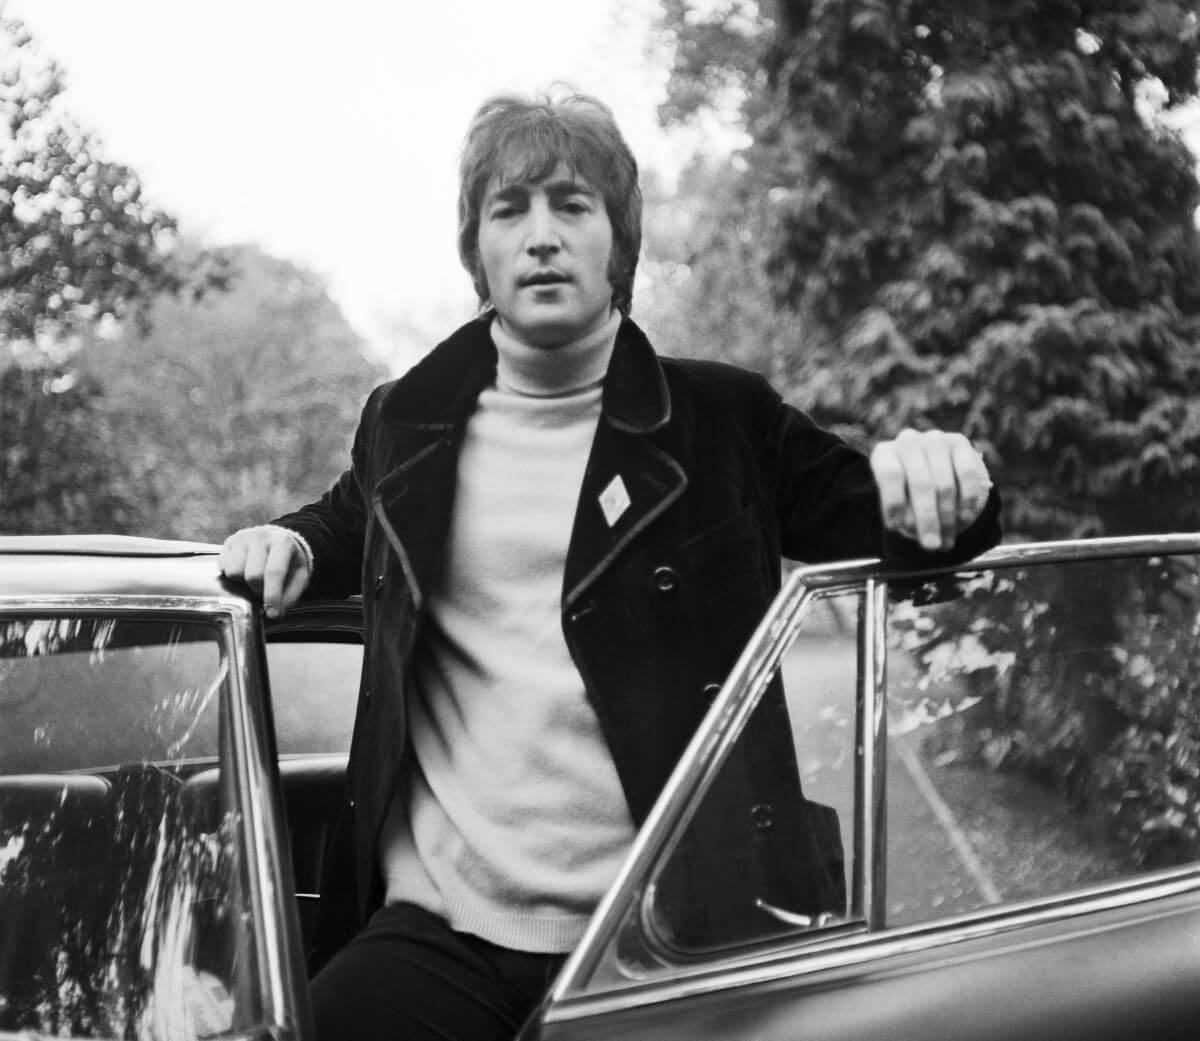 A black and white picture of John Lennon standing in an open car door.